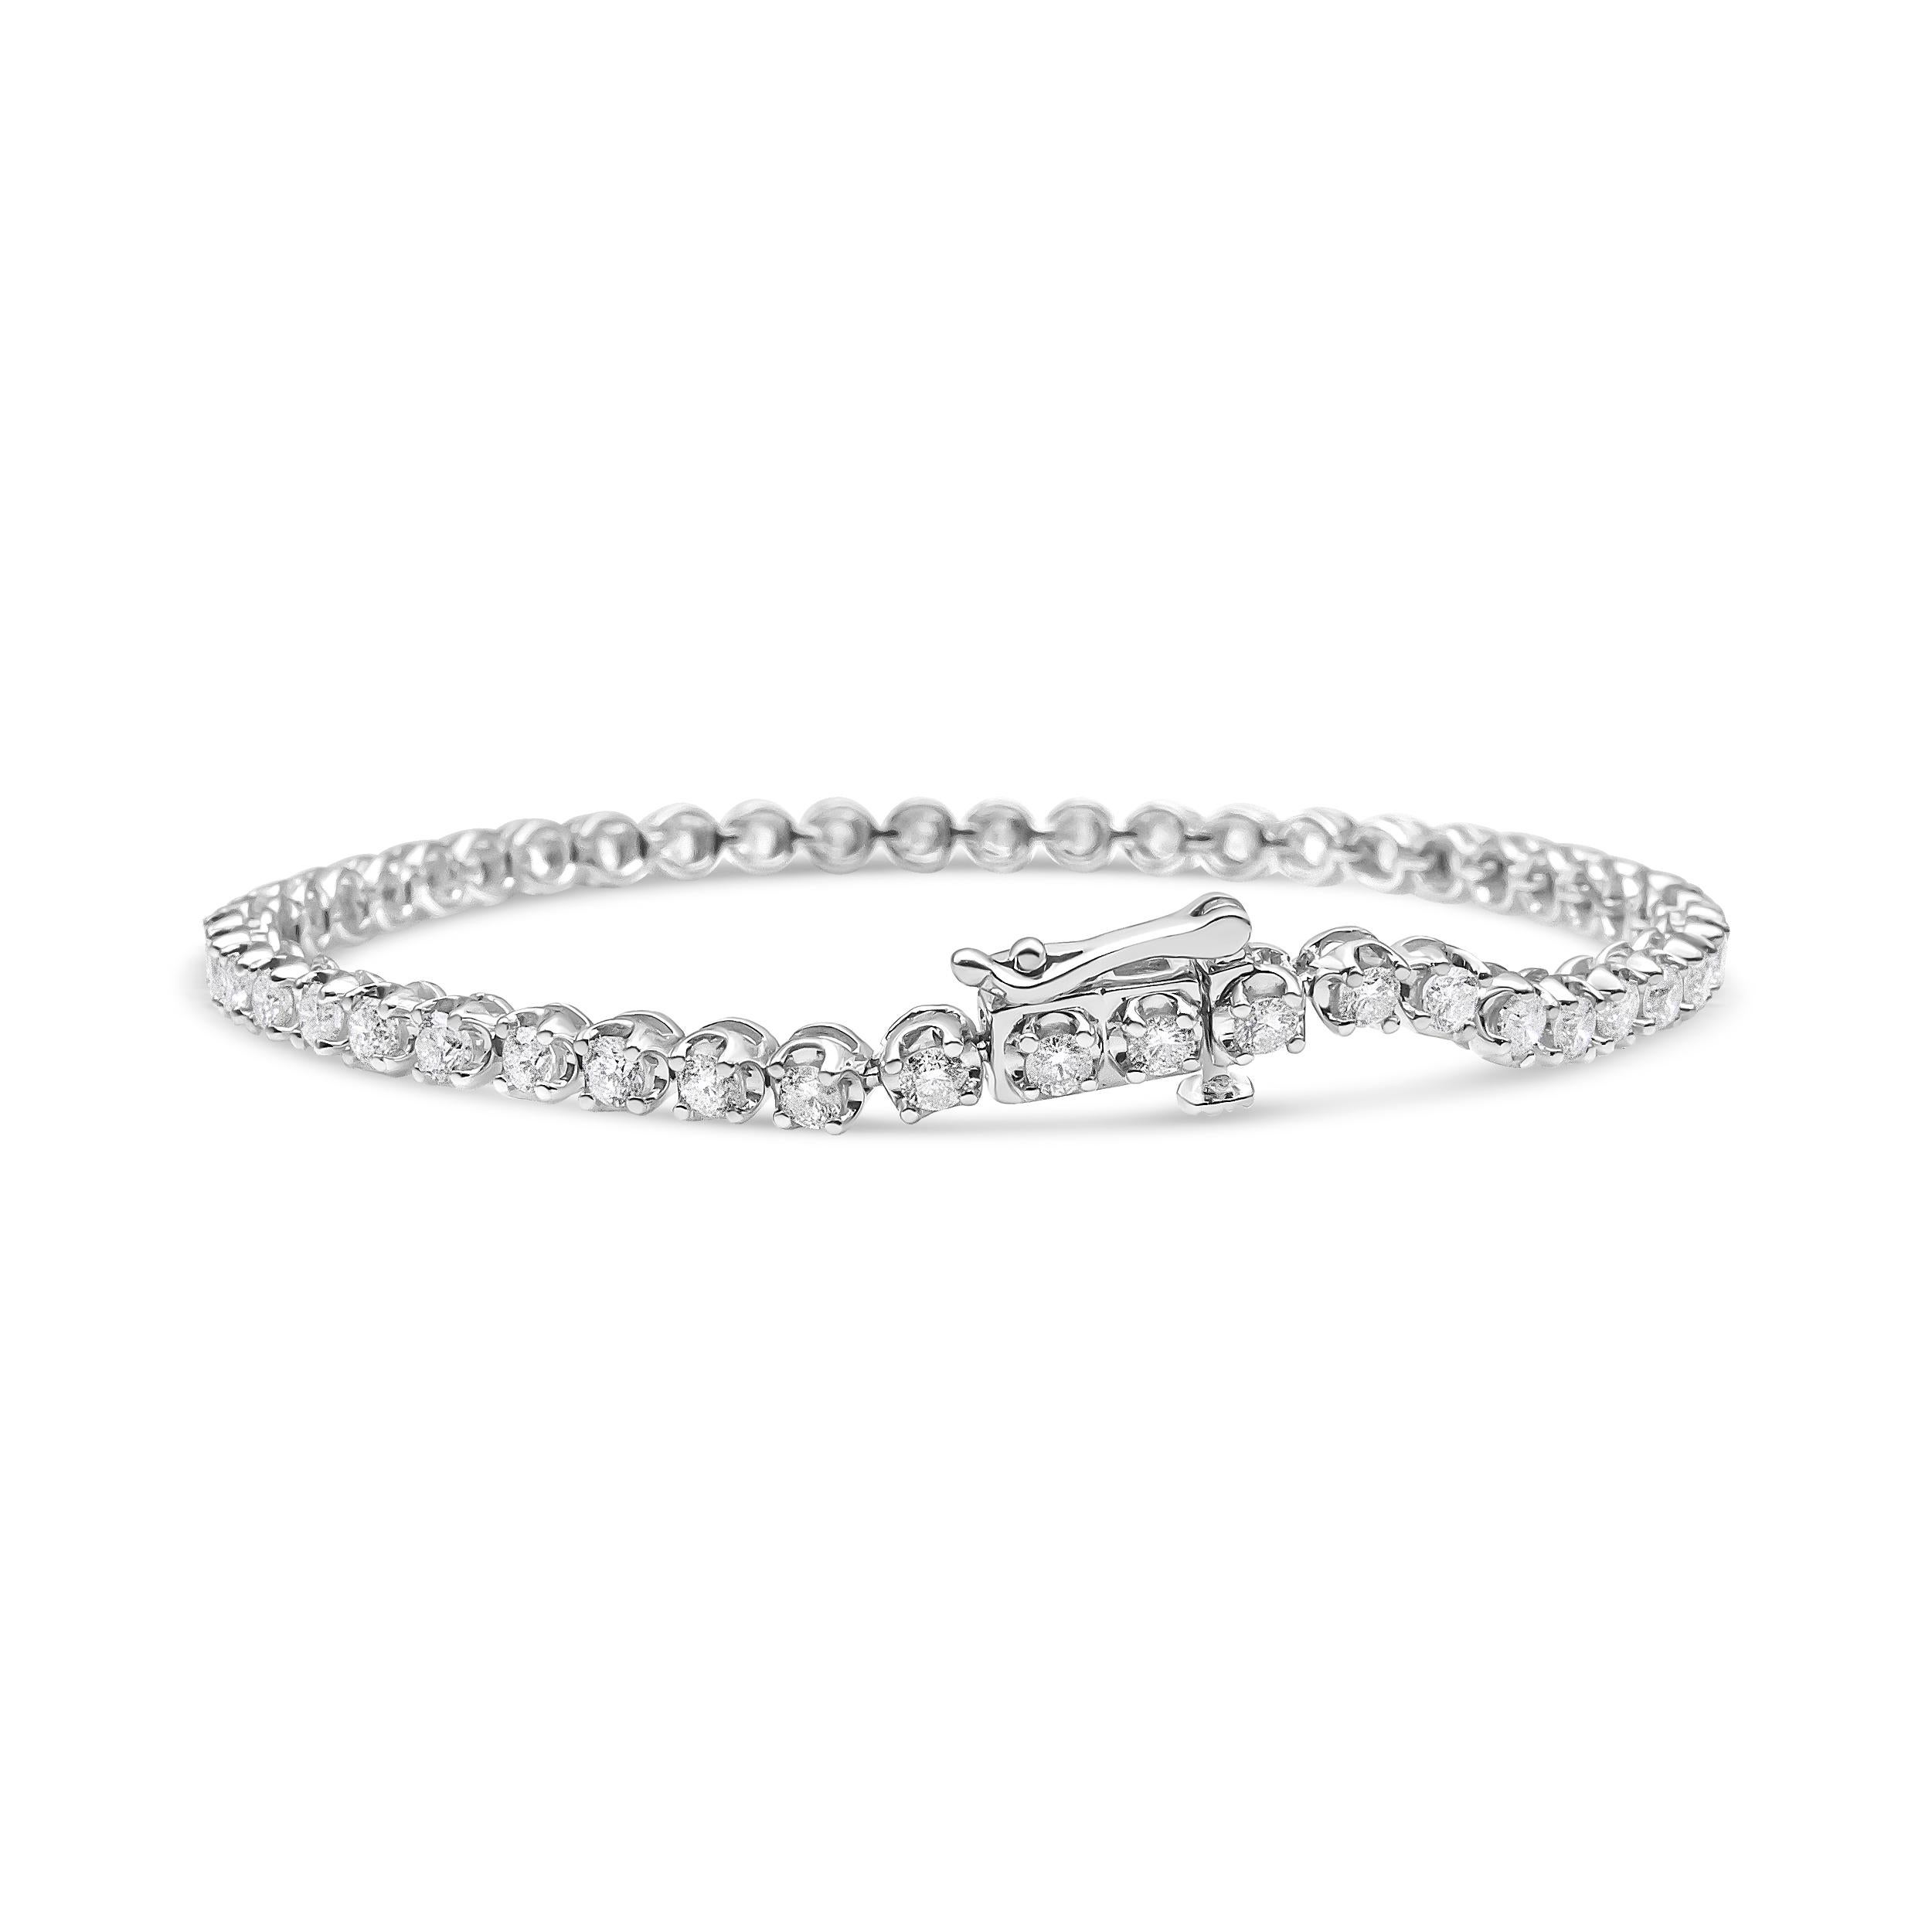 Magnificently striking, this glamorous tennis bracelet is embellished with an impressive total diamond weight of 5.0 c.t. This piece is crafted in 14k white gold, a metal that will stay tarnish free for years to come! 52 round-cut diamonds are set